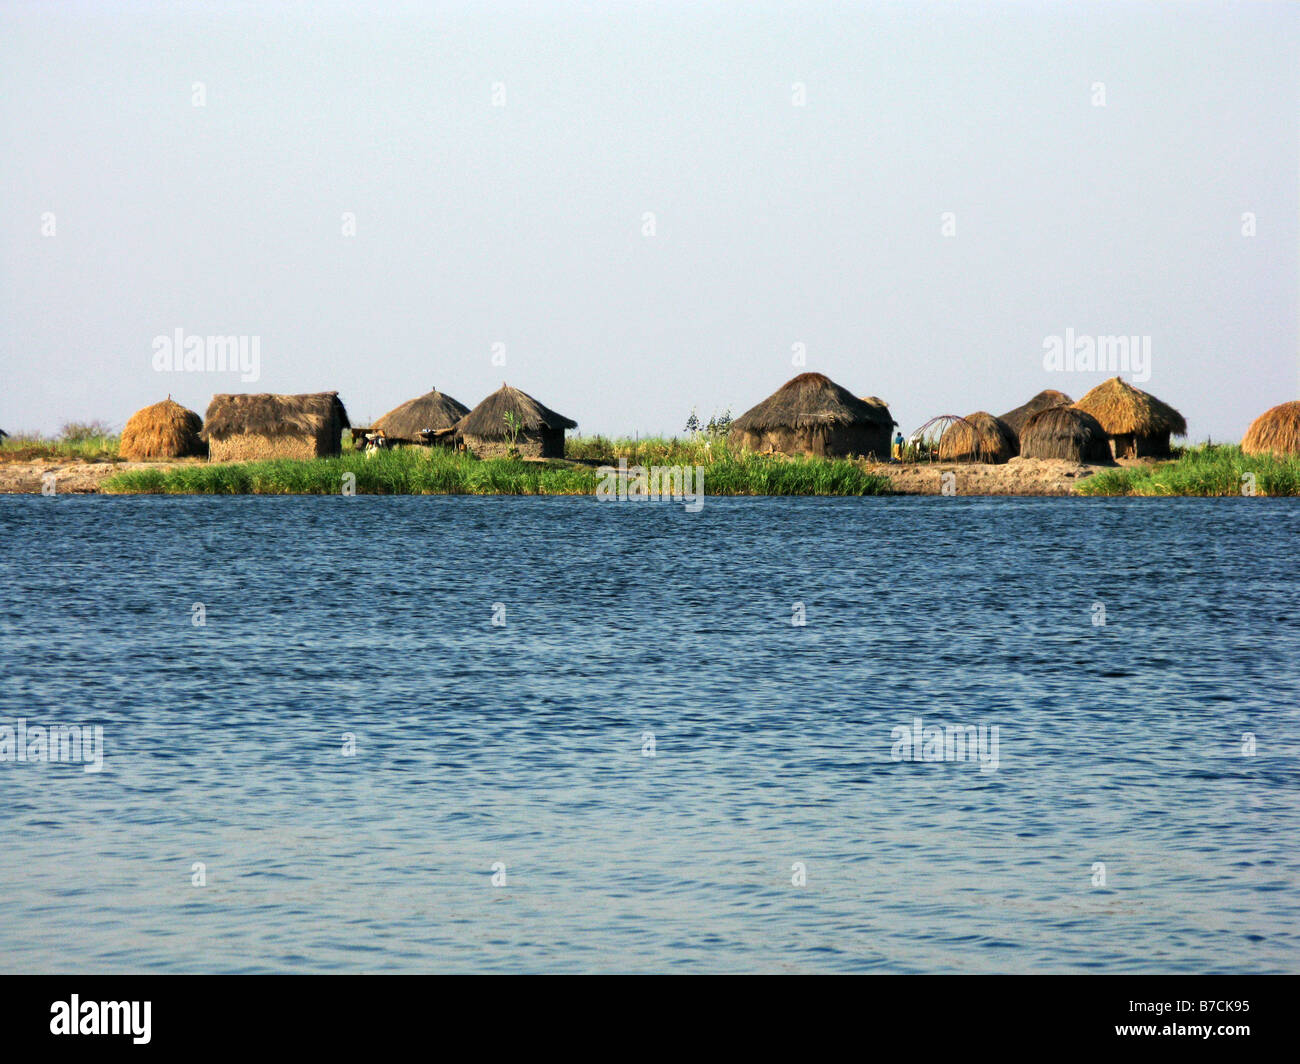 Typical straw hut village on banks of Lower Luapula River a tributary of the Congo in Democratic Republic of Congo Stock Photo